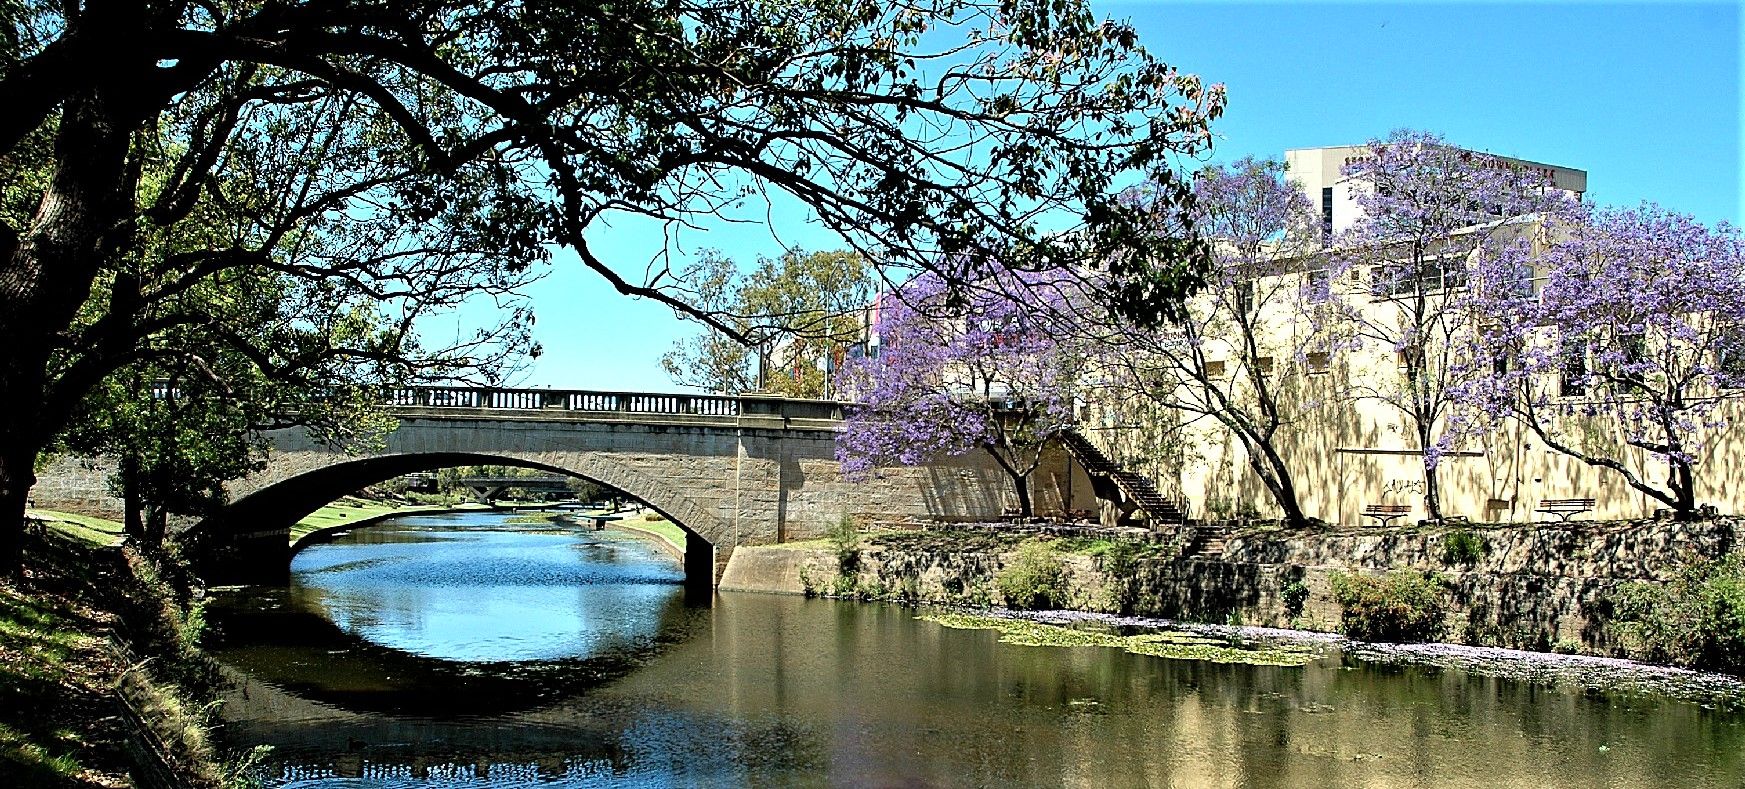 Welcome to our Parramatta History and Heritage website!